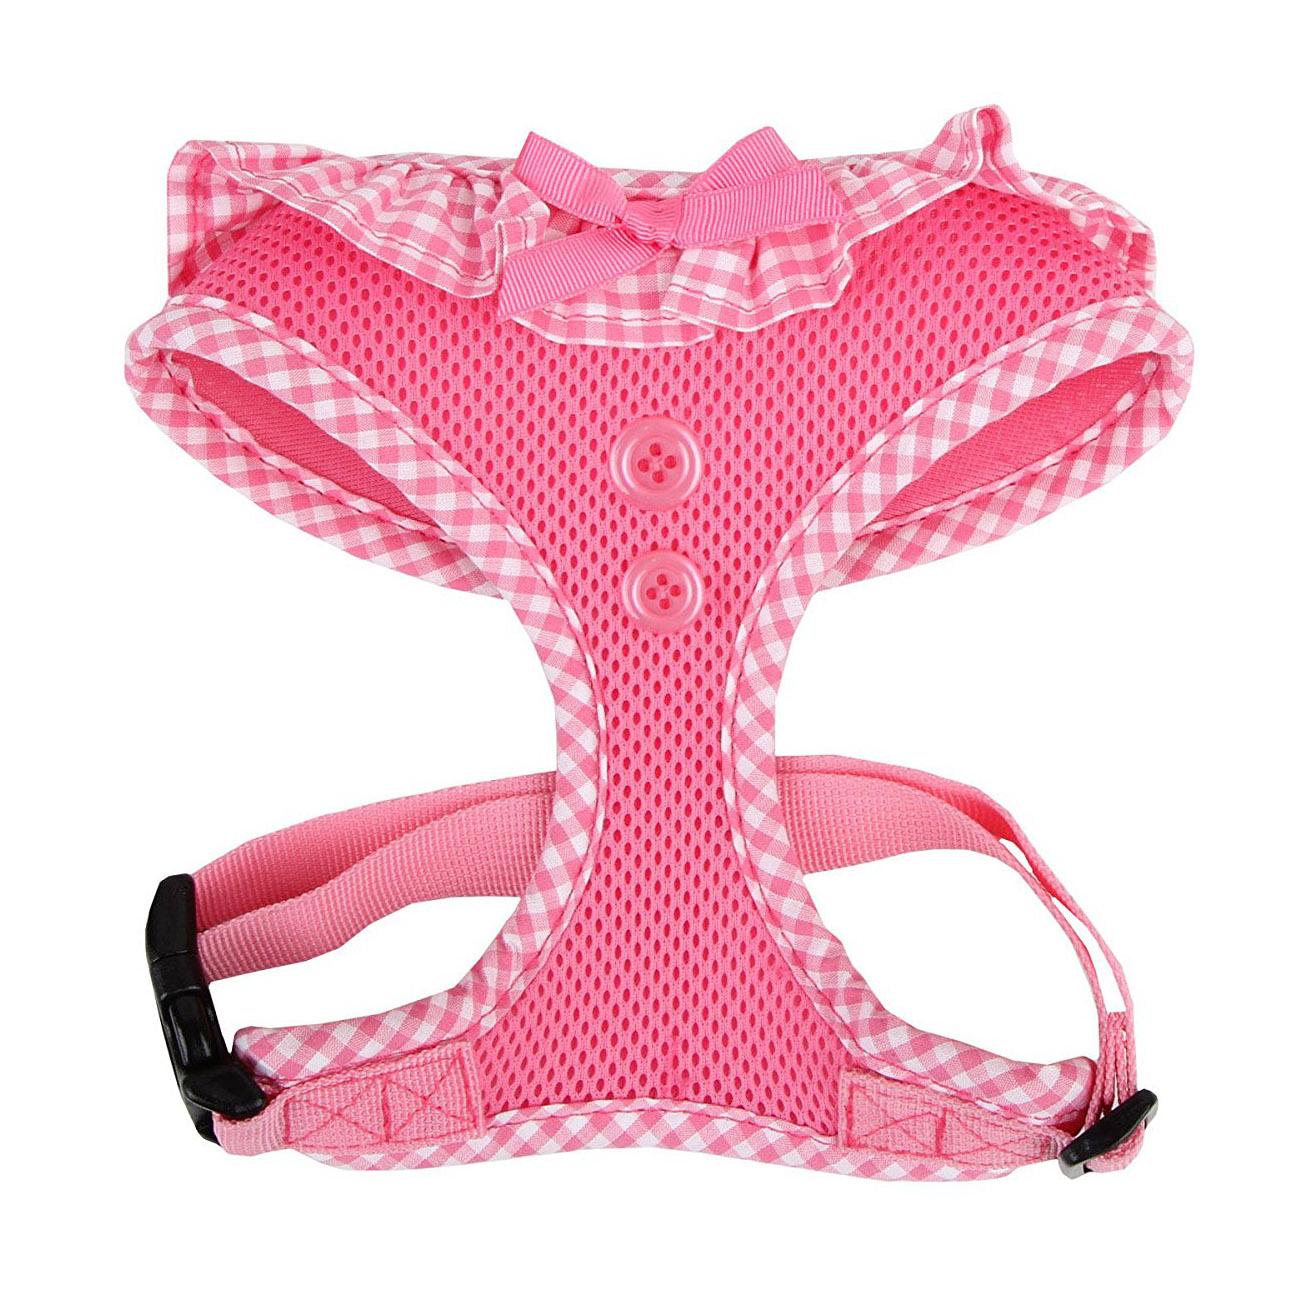 Vivien Dog Harness by Puppia - Pink